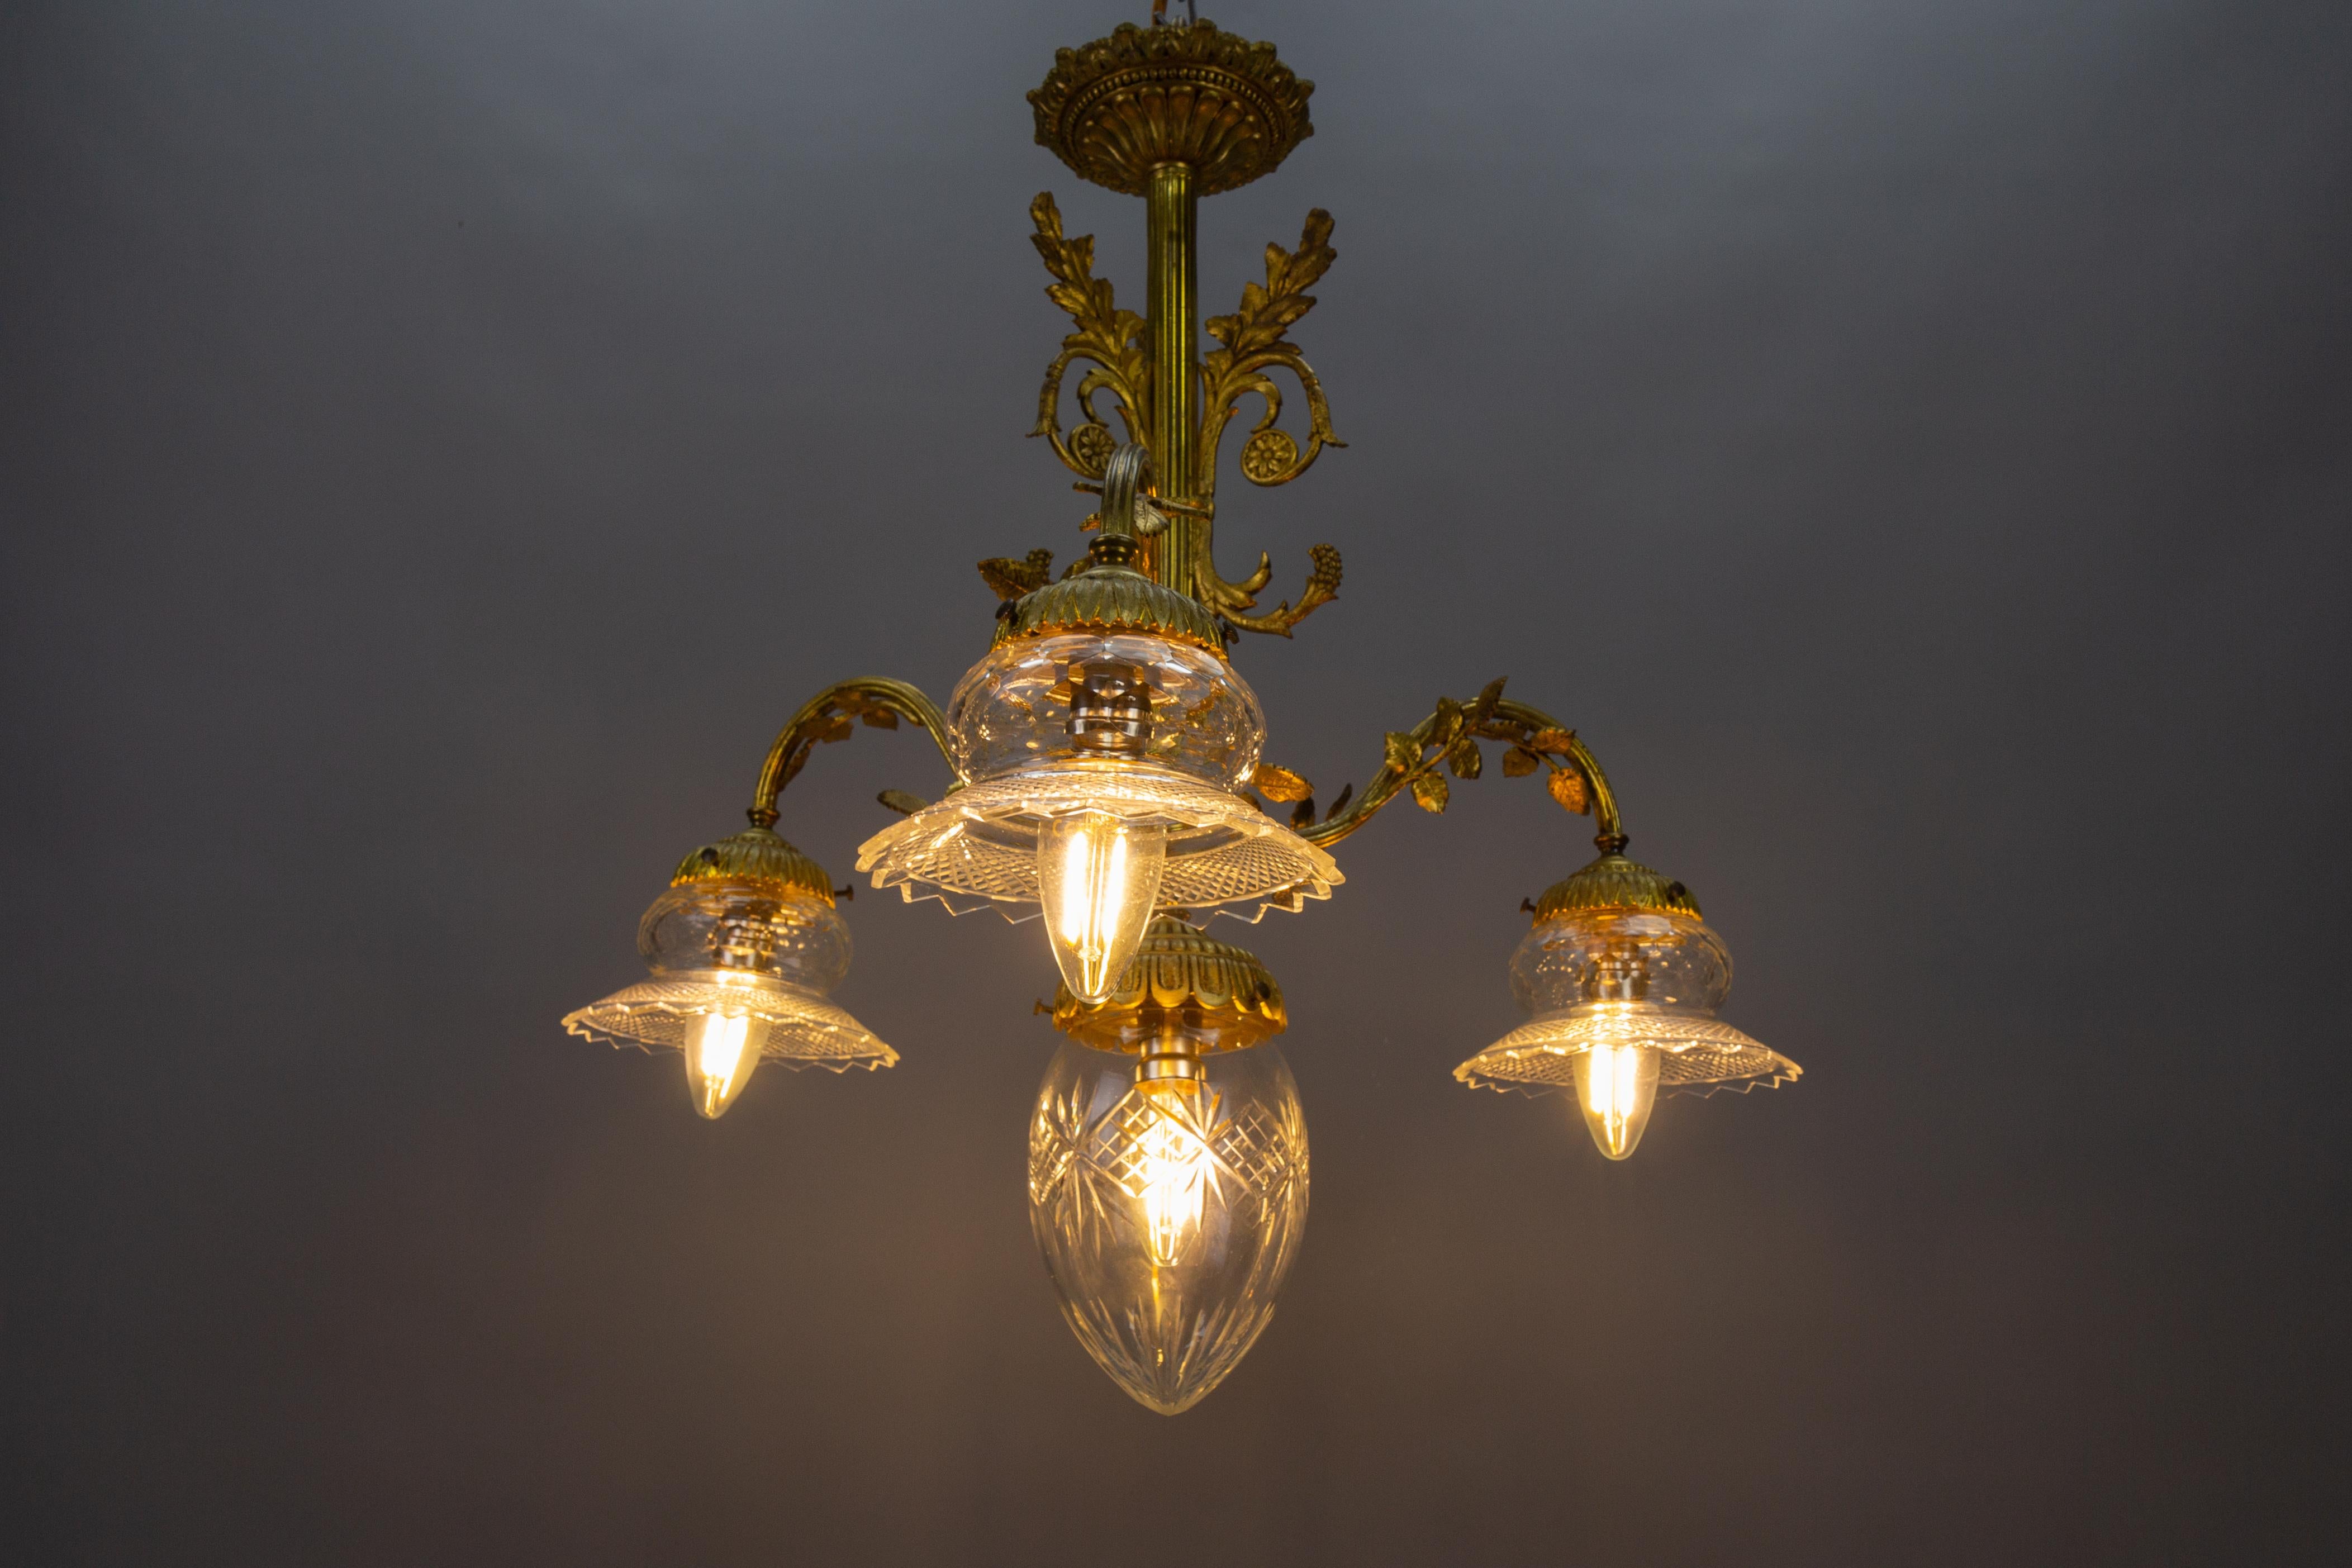 French Louis XVI style bronze and clear cut glass four-light chandelier from circa 1920s.
This adorable Neoclassical or Louis XVI-style bronze chandelier is adorned with scrolls, acanthus, and rose leaves and features three arms, each with a 